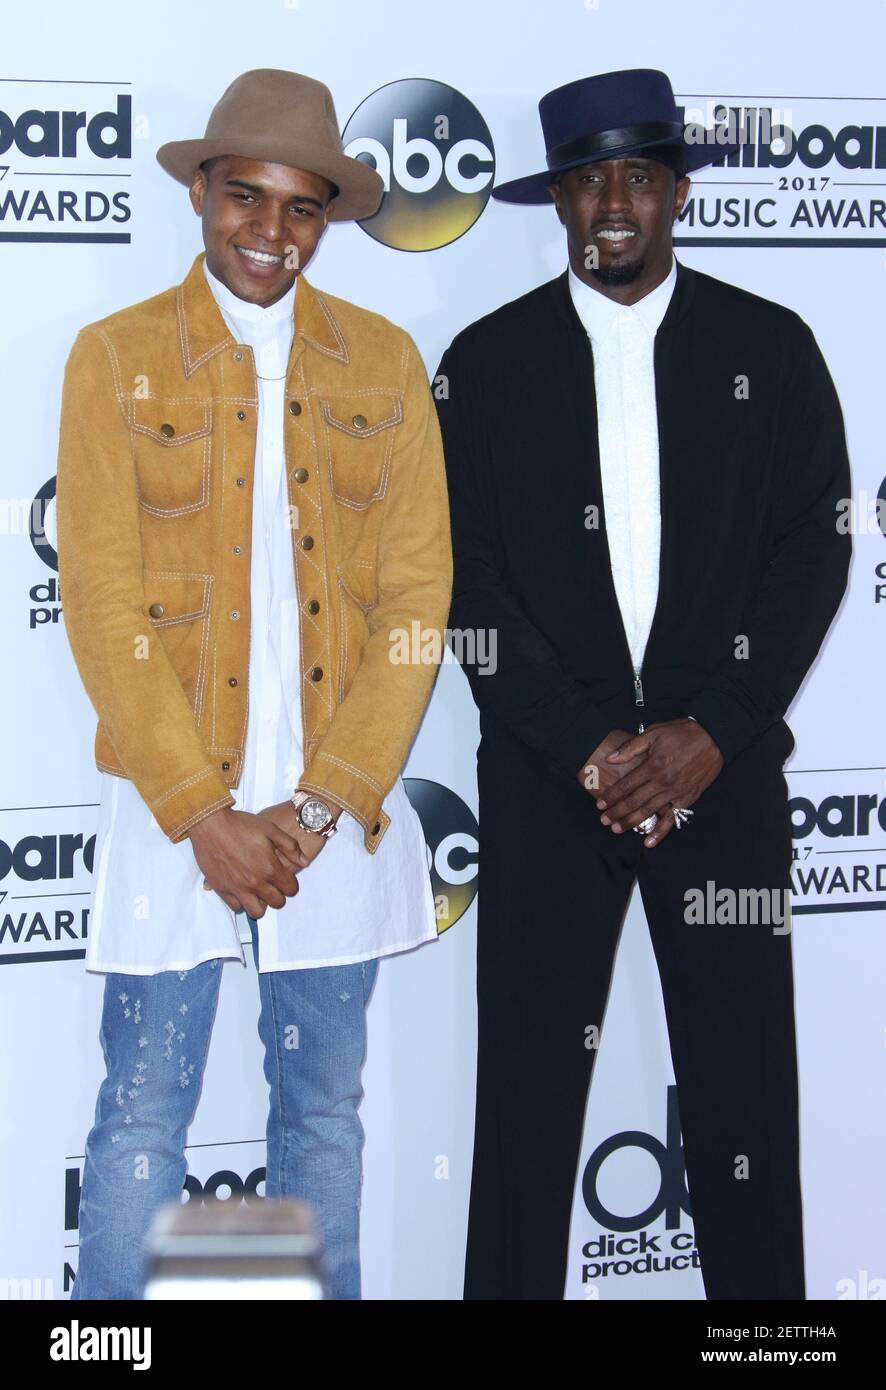 Actor Christopher Jordan Wallace (L) and producer Sean 'Diddy' Combs at  2017 Billboard Music Awards held at T-Mobile Arena on May 21, 2017 in Las  Vegas, NV, USA (Photo by Jc Olivera) ***